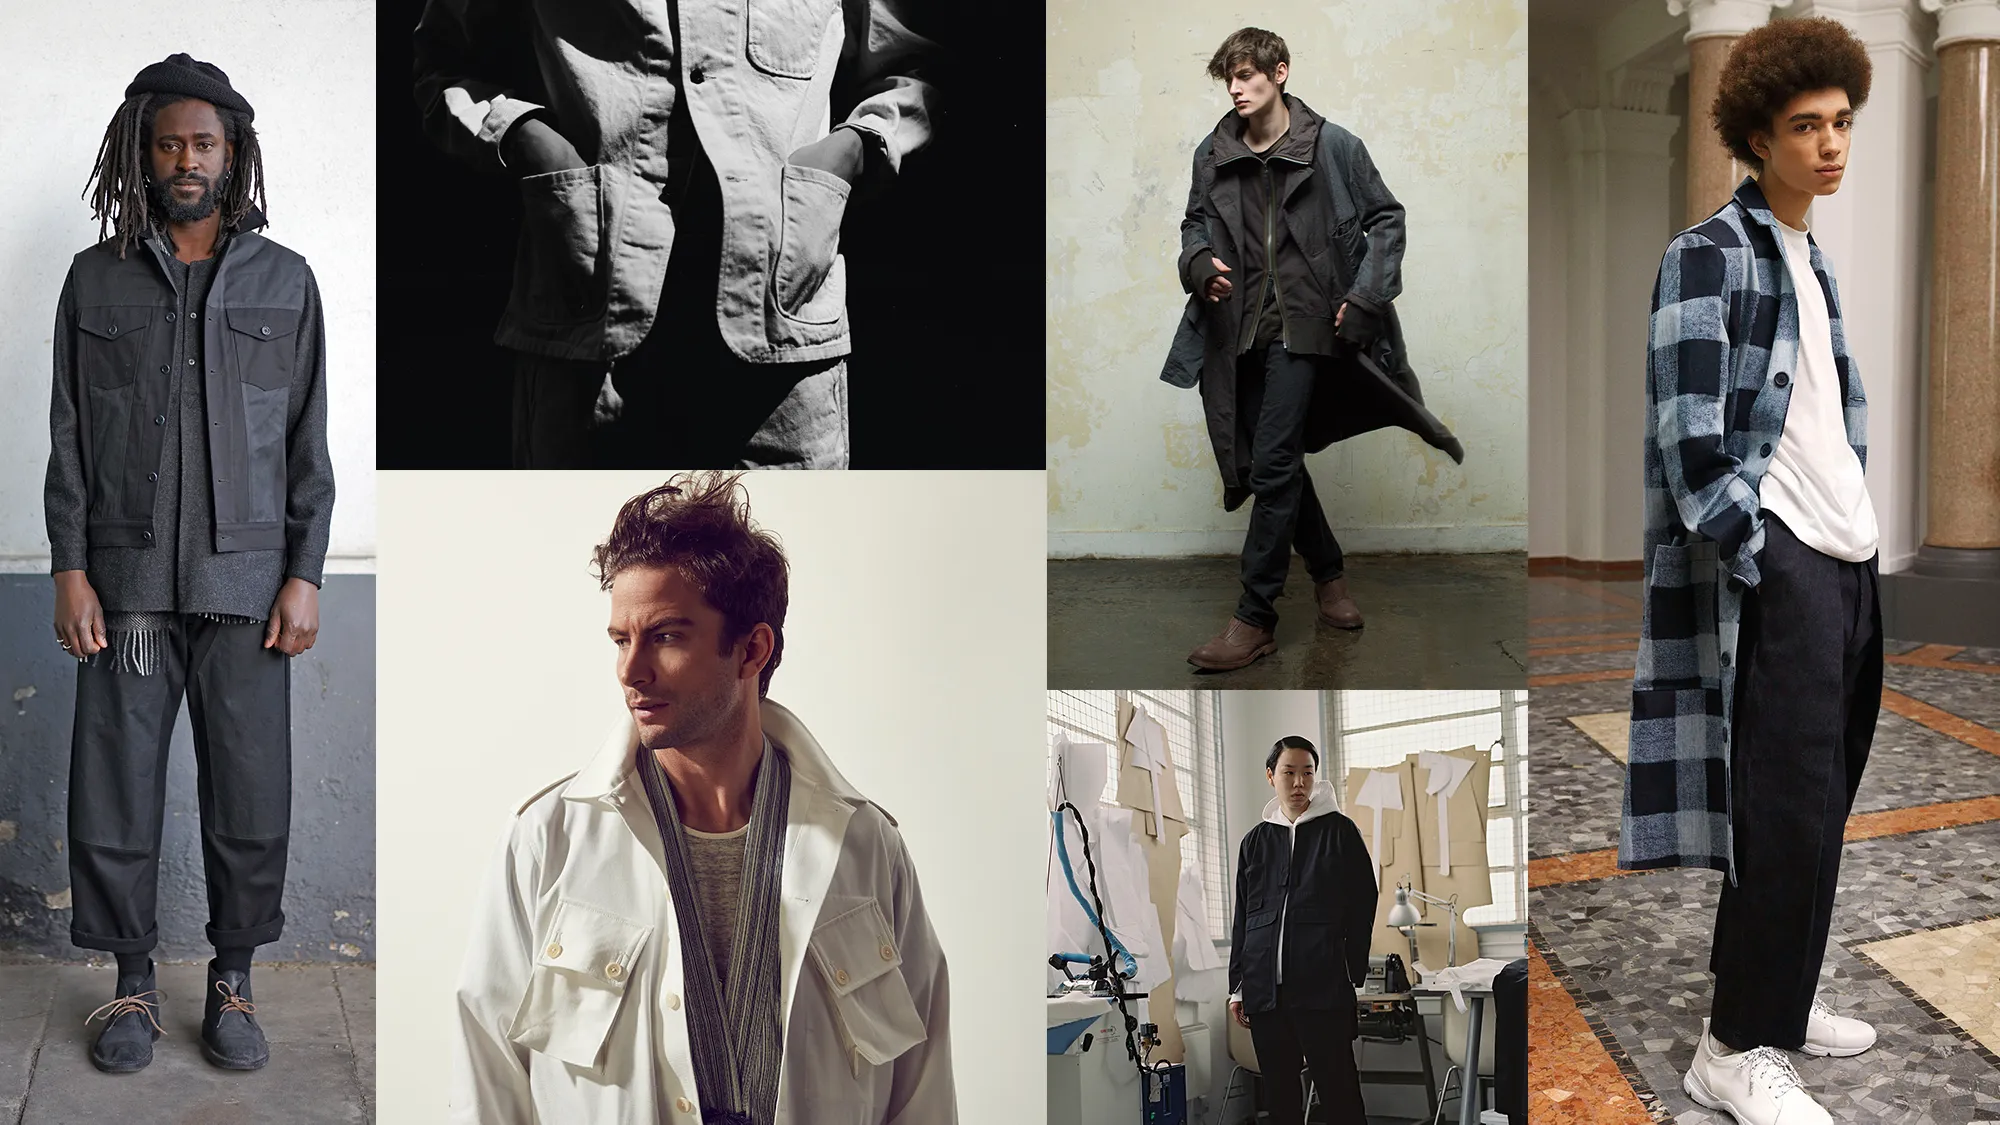 The History of Iconic Fashion Designers and Their Impact on the Industry